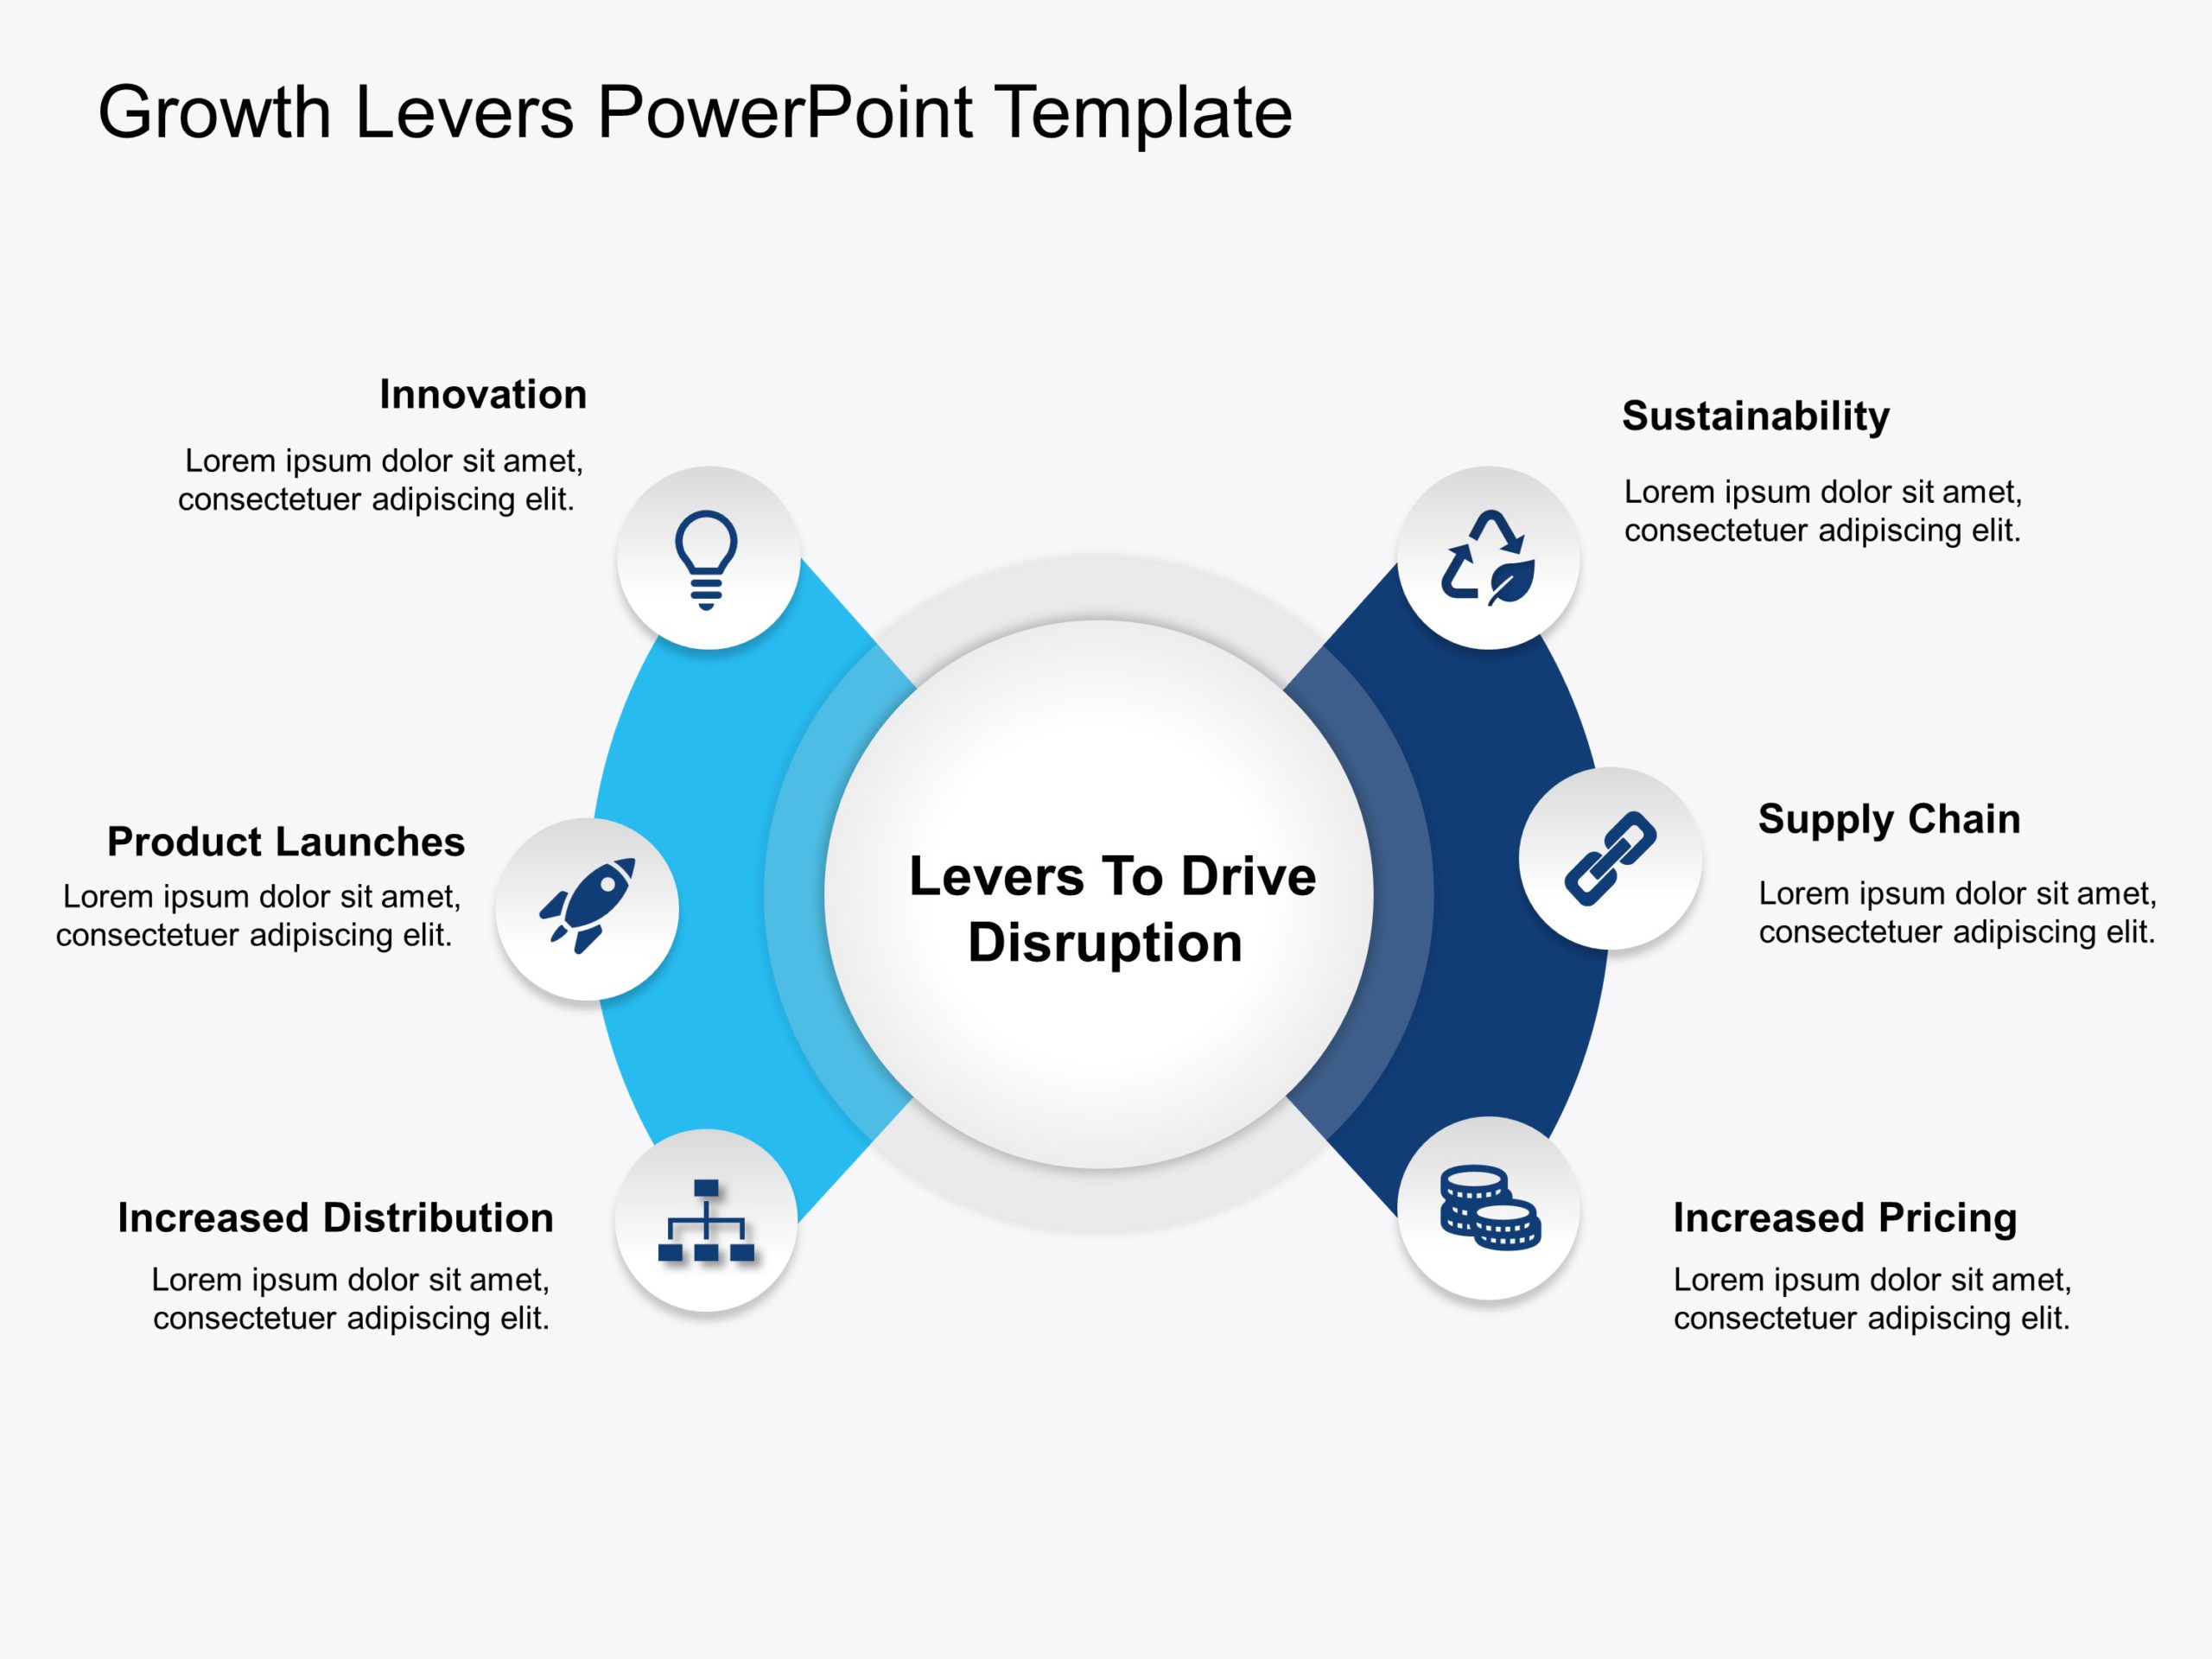 Growth Levers PowerPoint Template